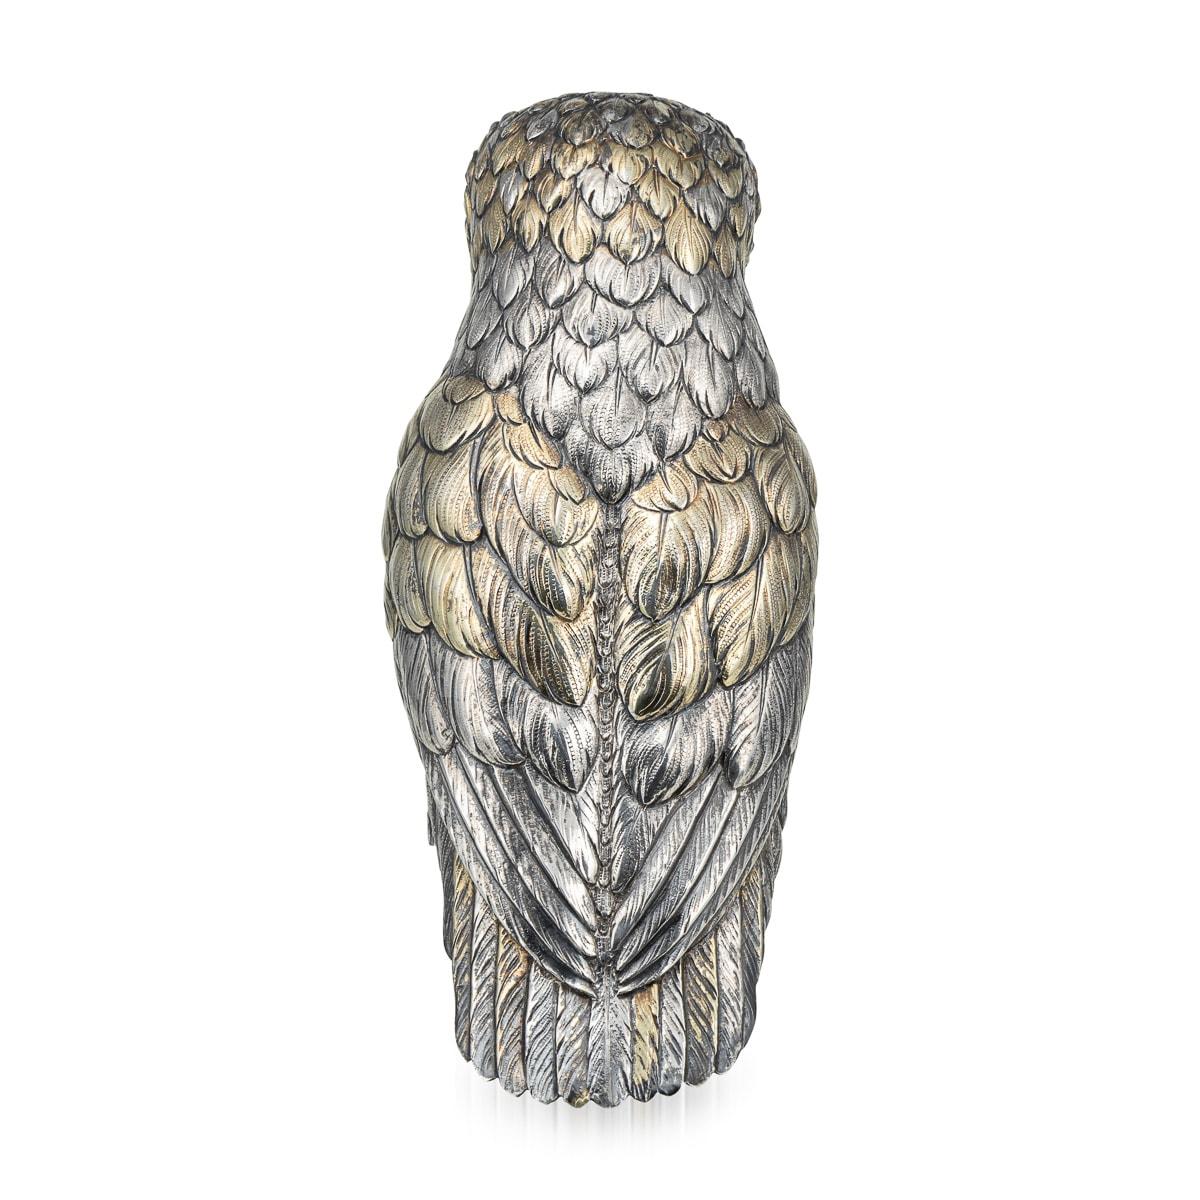 Antique 20th Century German Solid Silver Owl Figure, Hanau c.1920 In Good Condition For Sale In Royal Tunbridge Wells, Kent